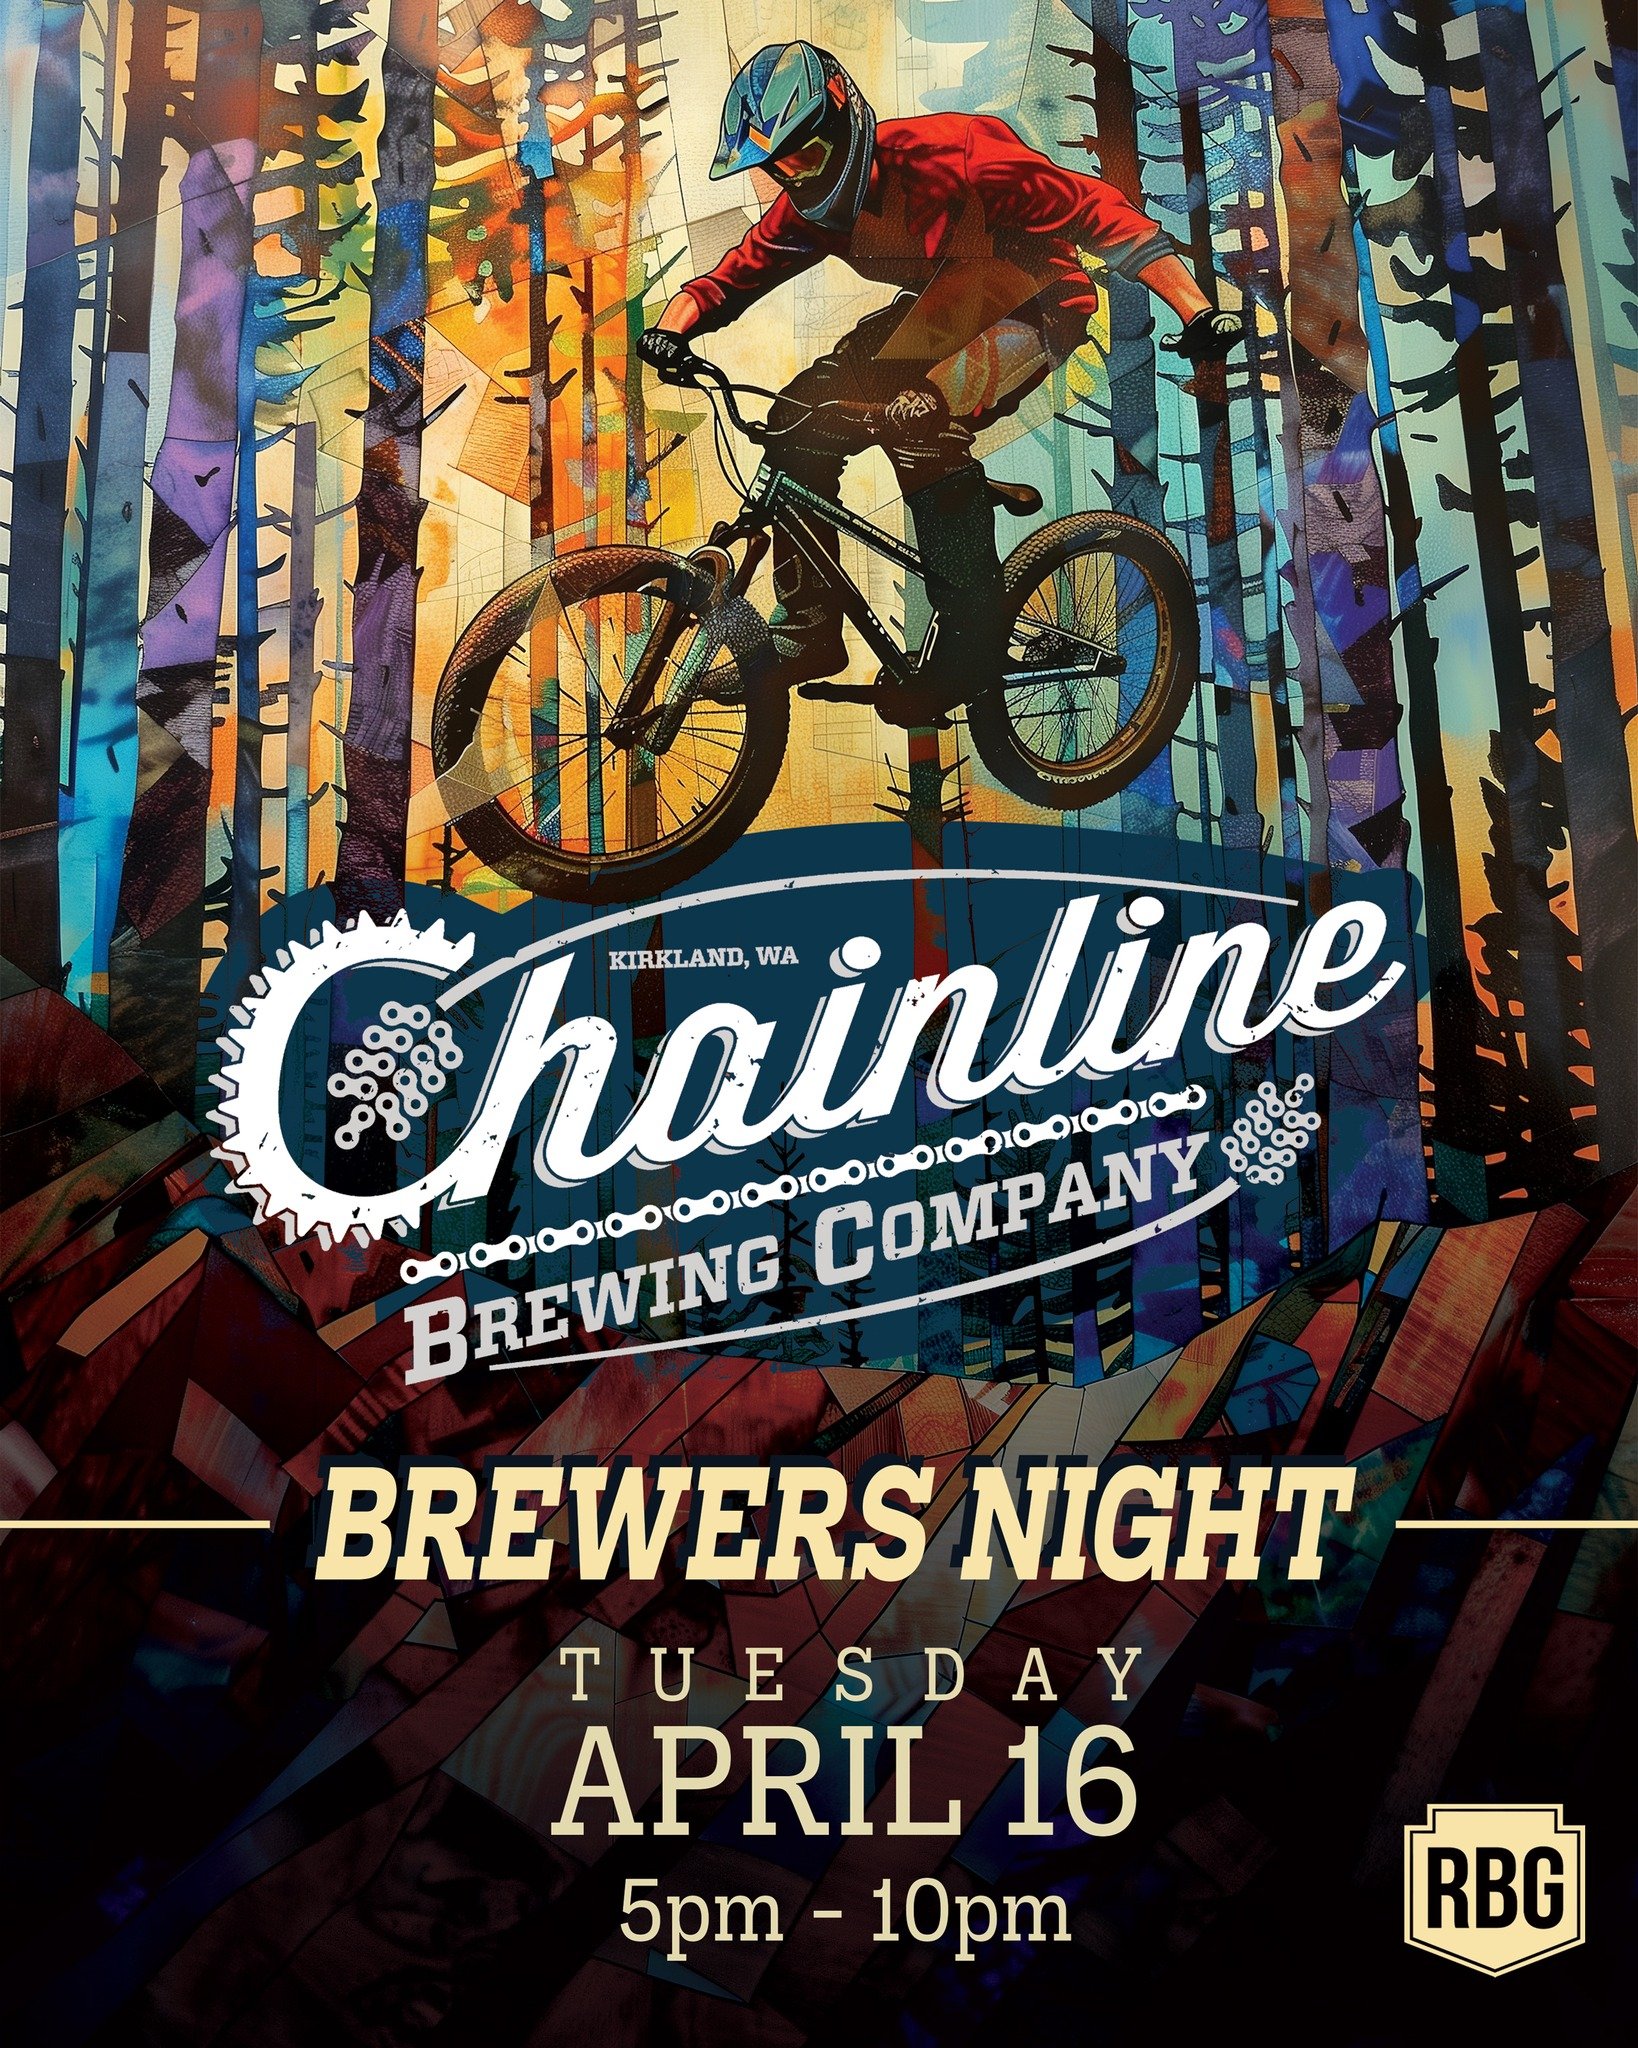 HAPPY TACO TUESDAY!!! 🌮🌮🌮

WE HAVE CHAINLINE BREWERY WITH US TONIGHT!! 🍻🍻

TONIGHT'S TRIVIA TOPICS: 
*Friends
*Astronomy
*Pictures - Rebuses
*Music - Jock Rock and Sports Songs
*and Rhyme Time

**BONUS - Take a picture of a picture of your answe